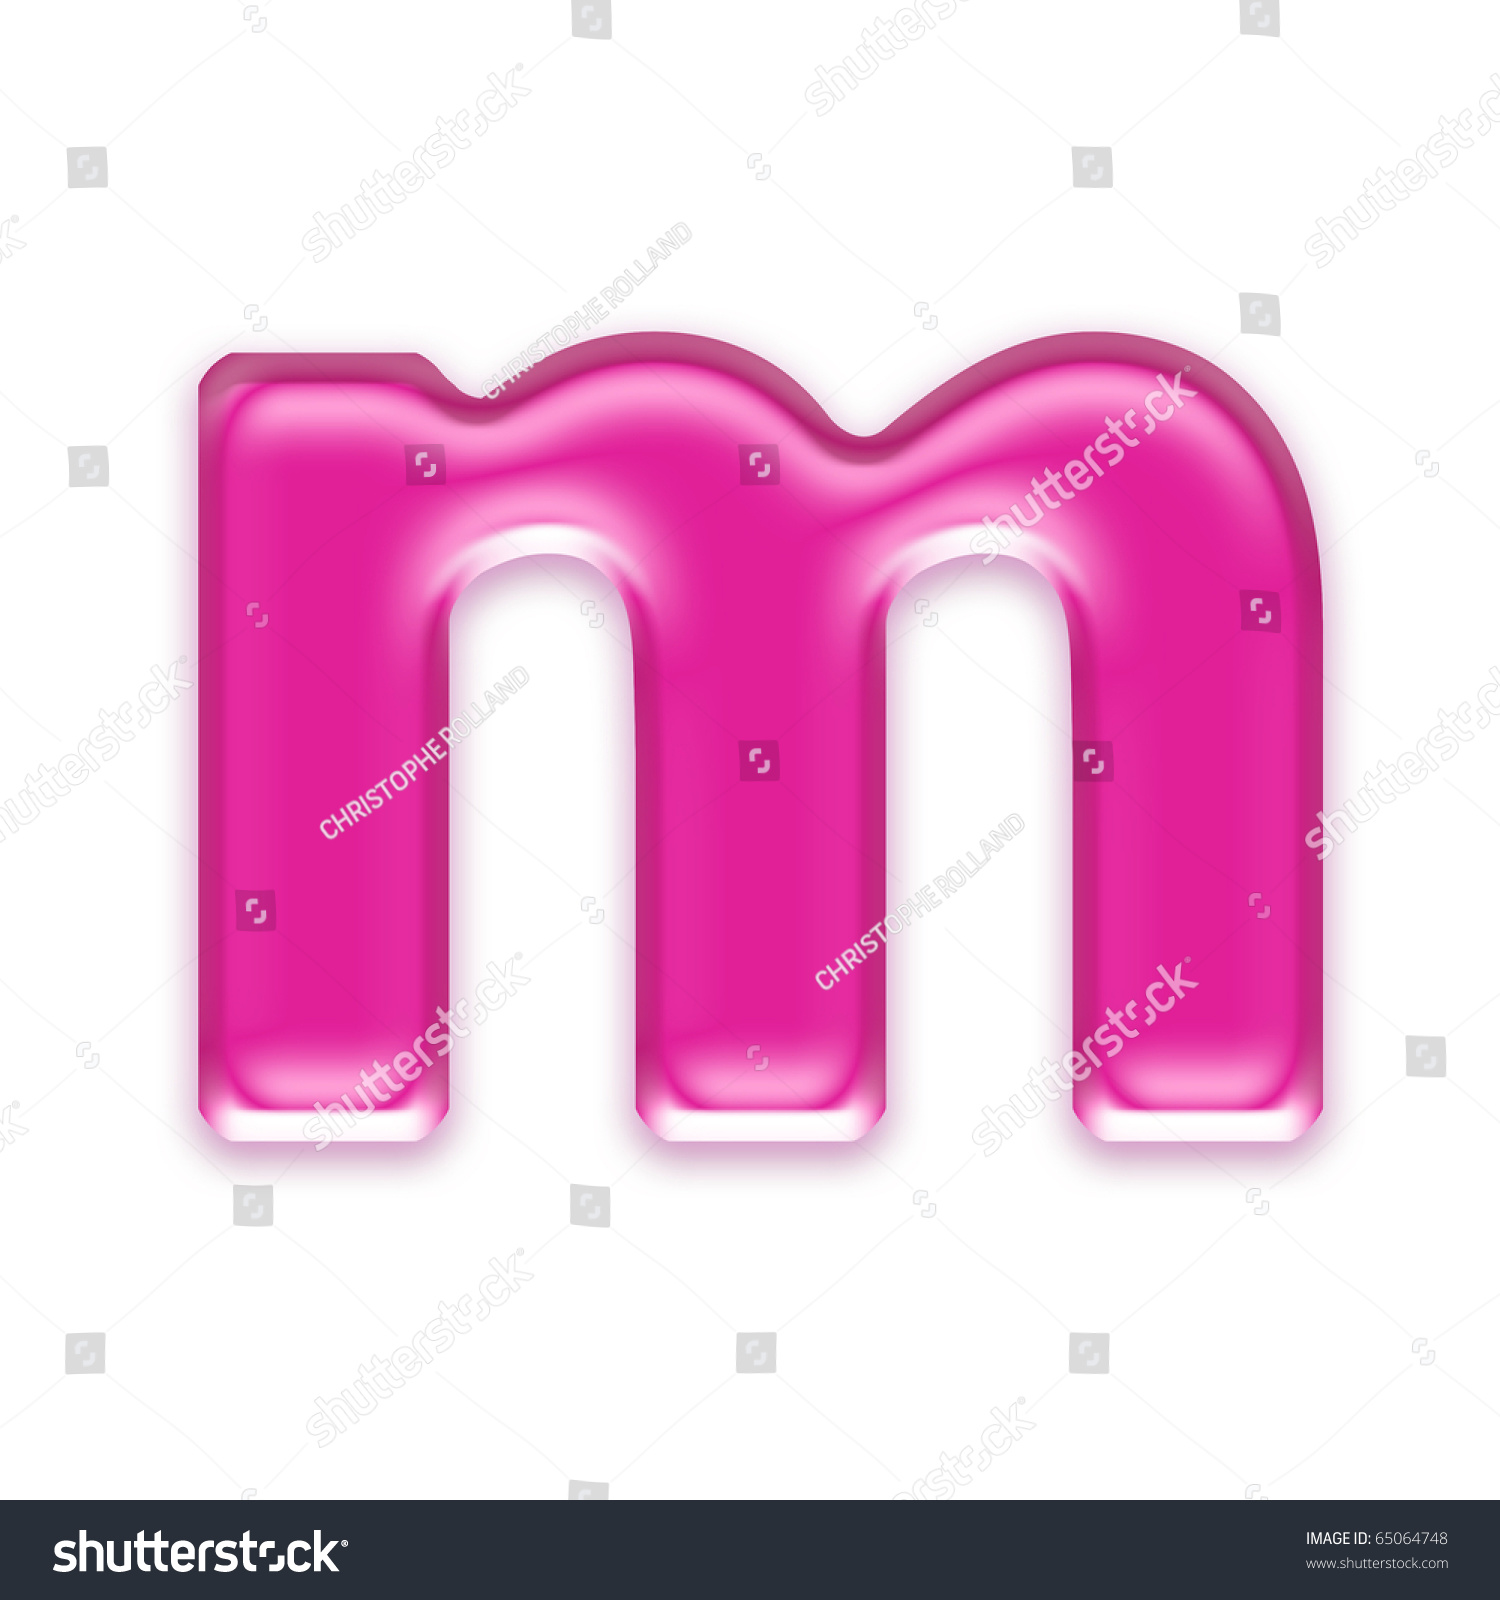 Pink Jelly Letter Isolated On White Stock Illustration 65064748 ...